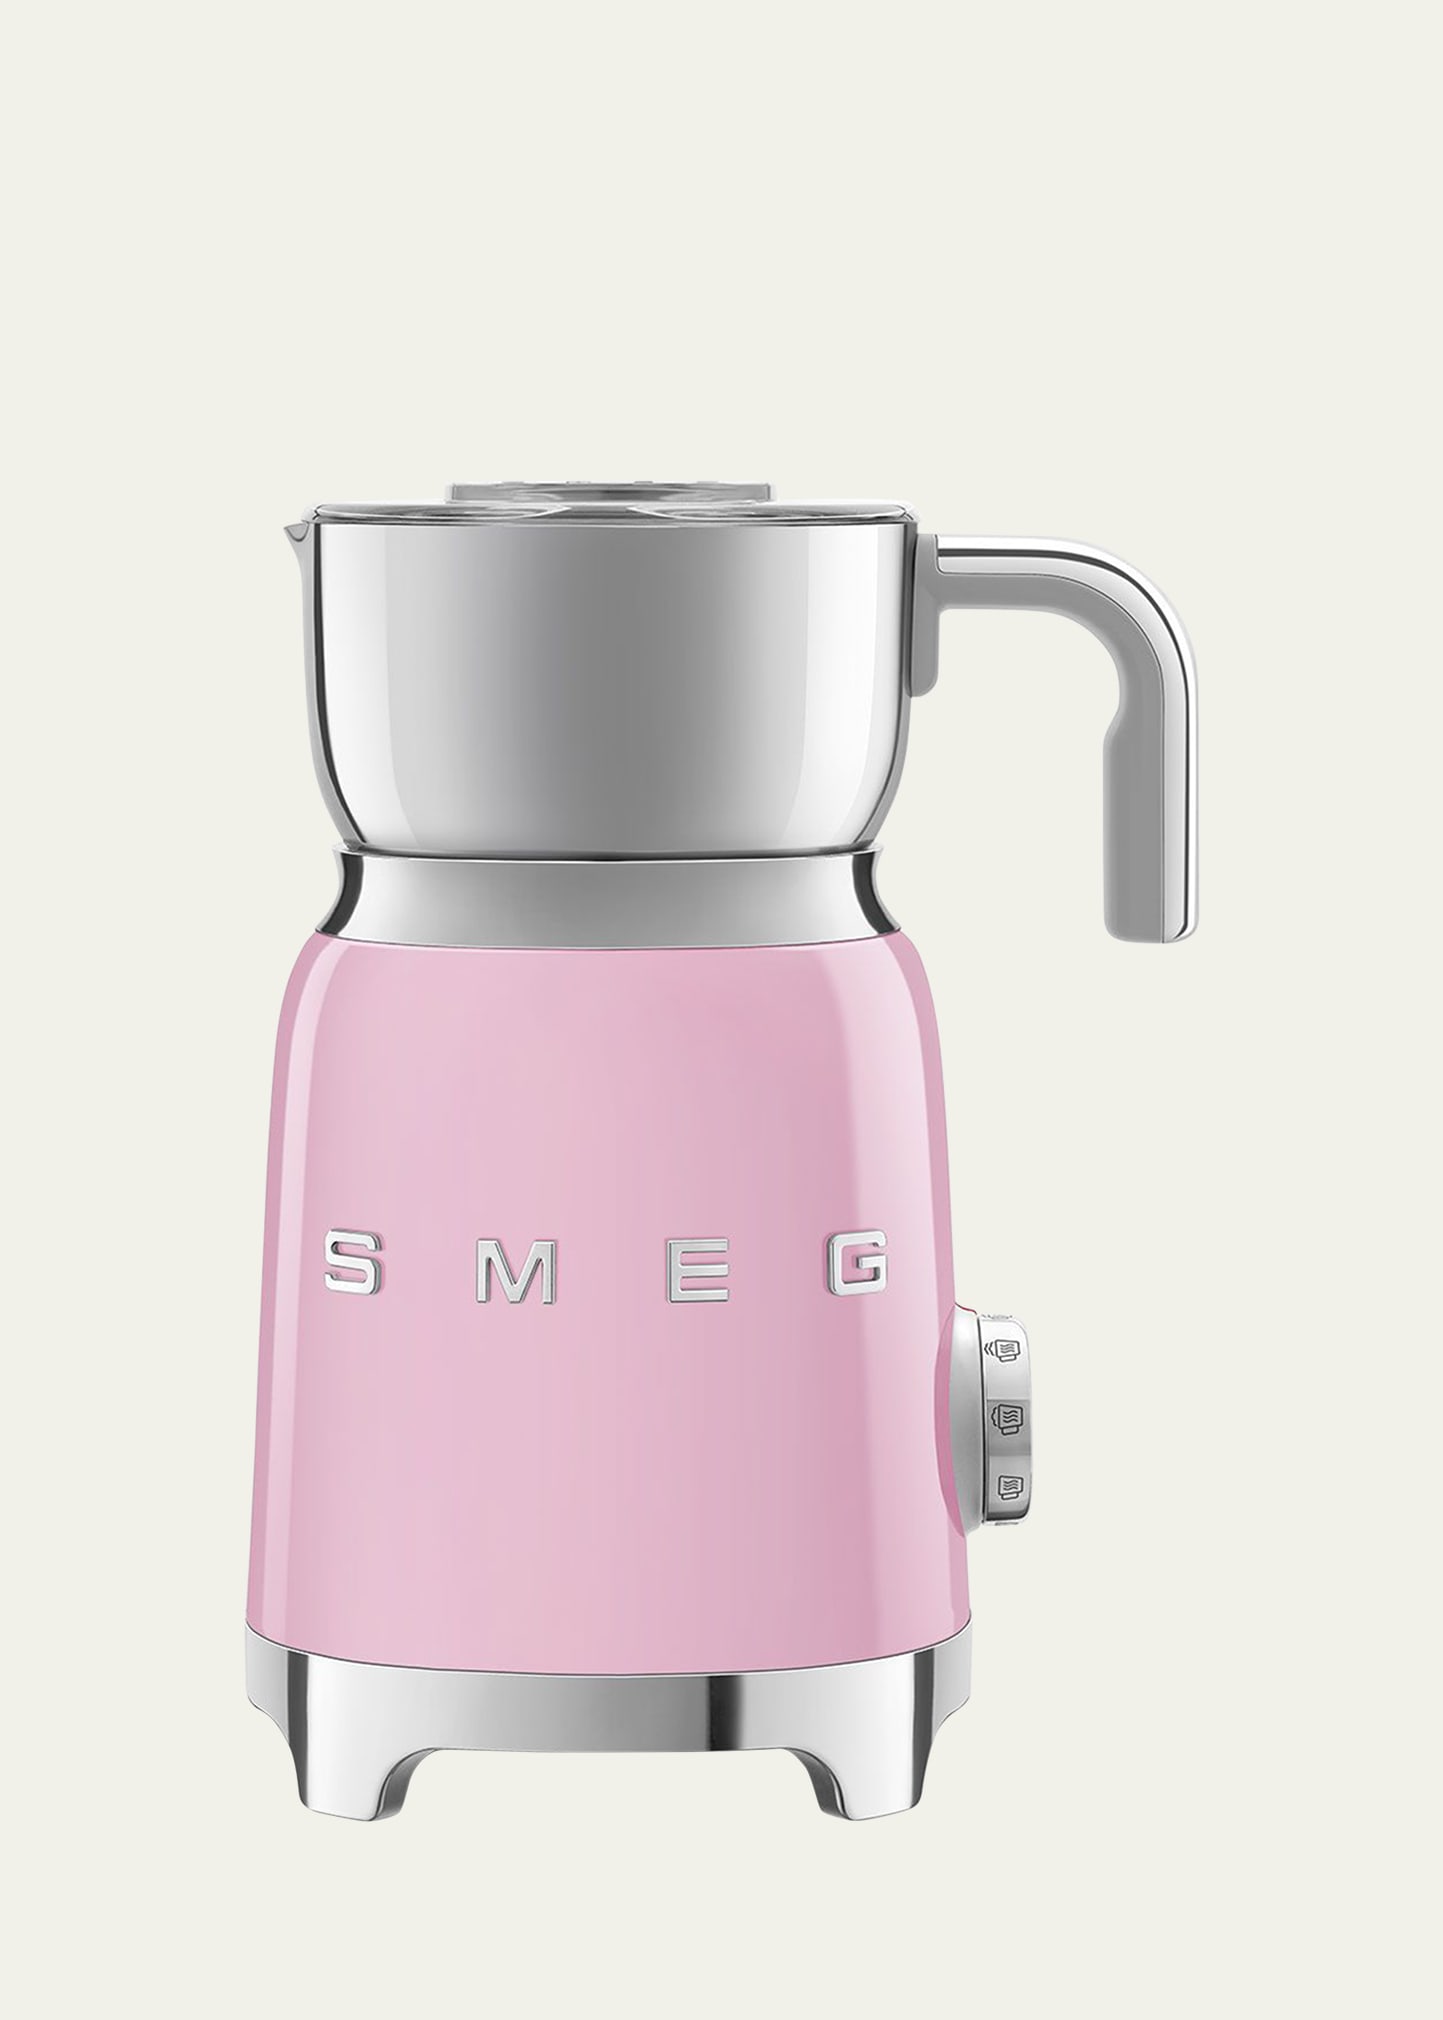 Smeg Retro-style Milk Frother In Pink